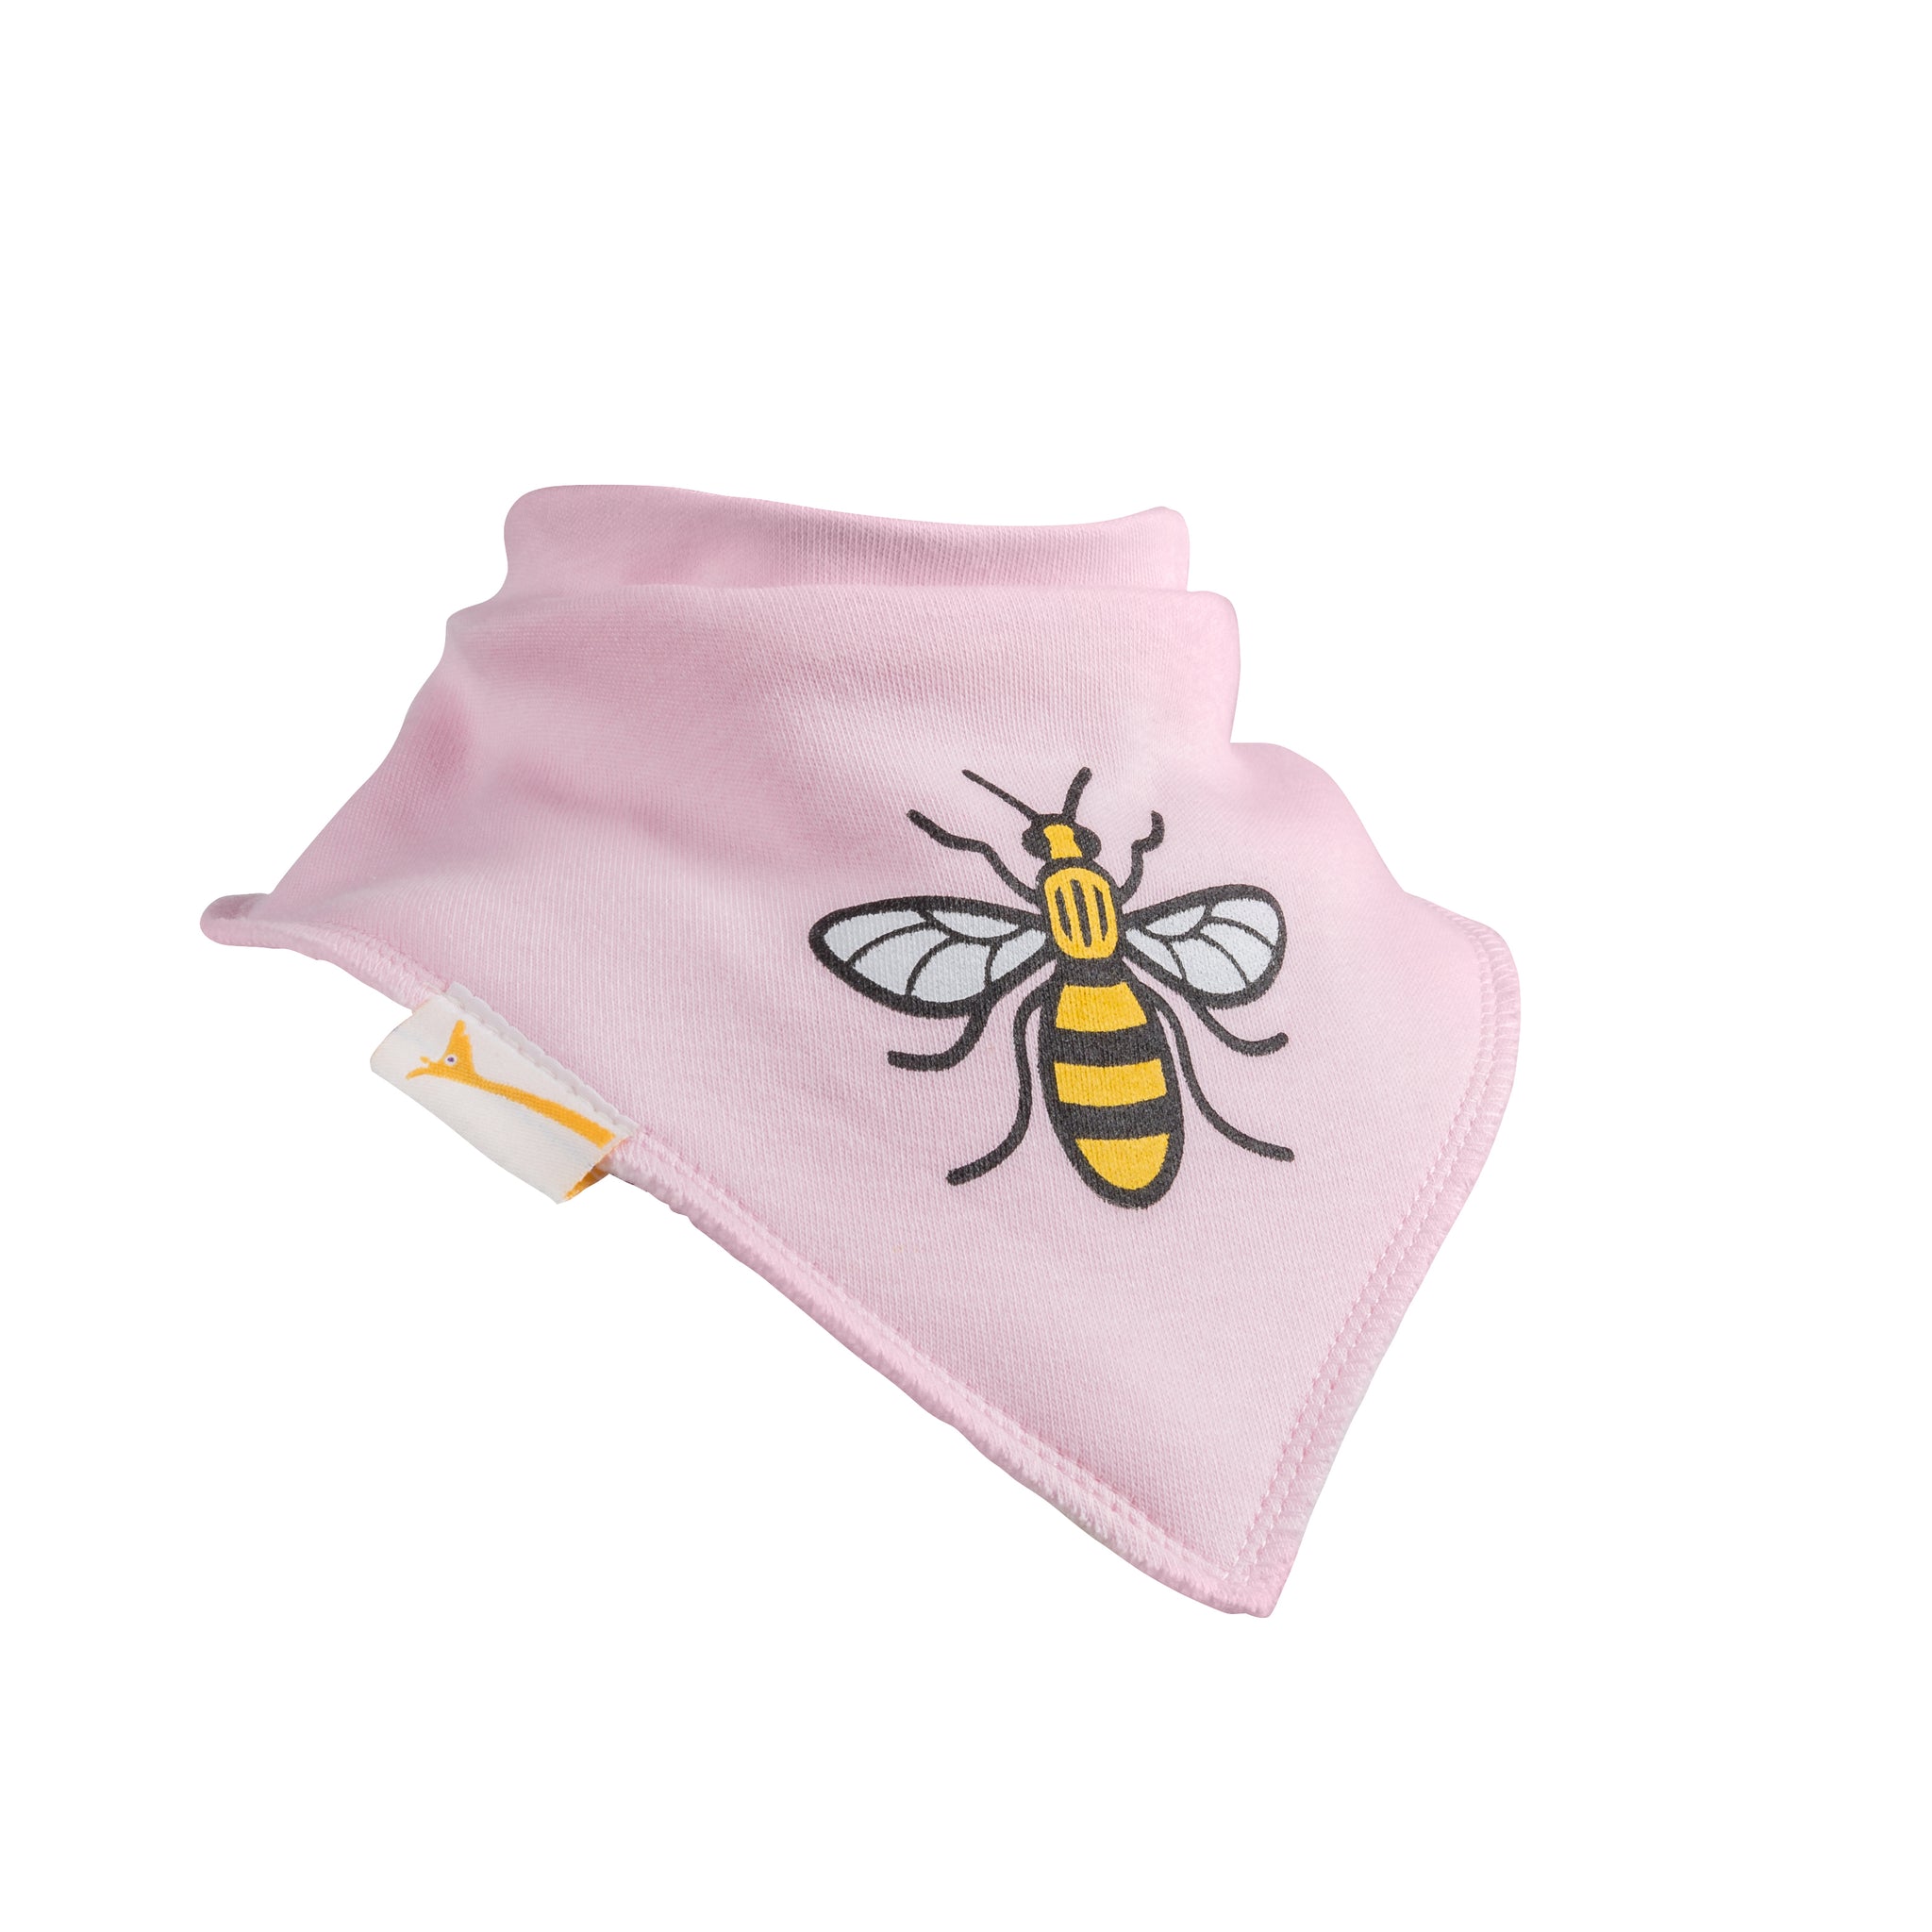 Busy Bee on Pink